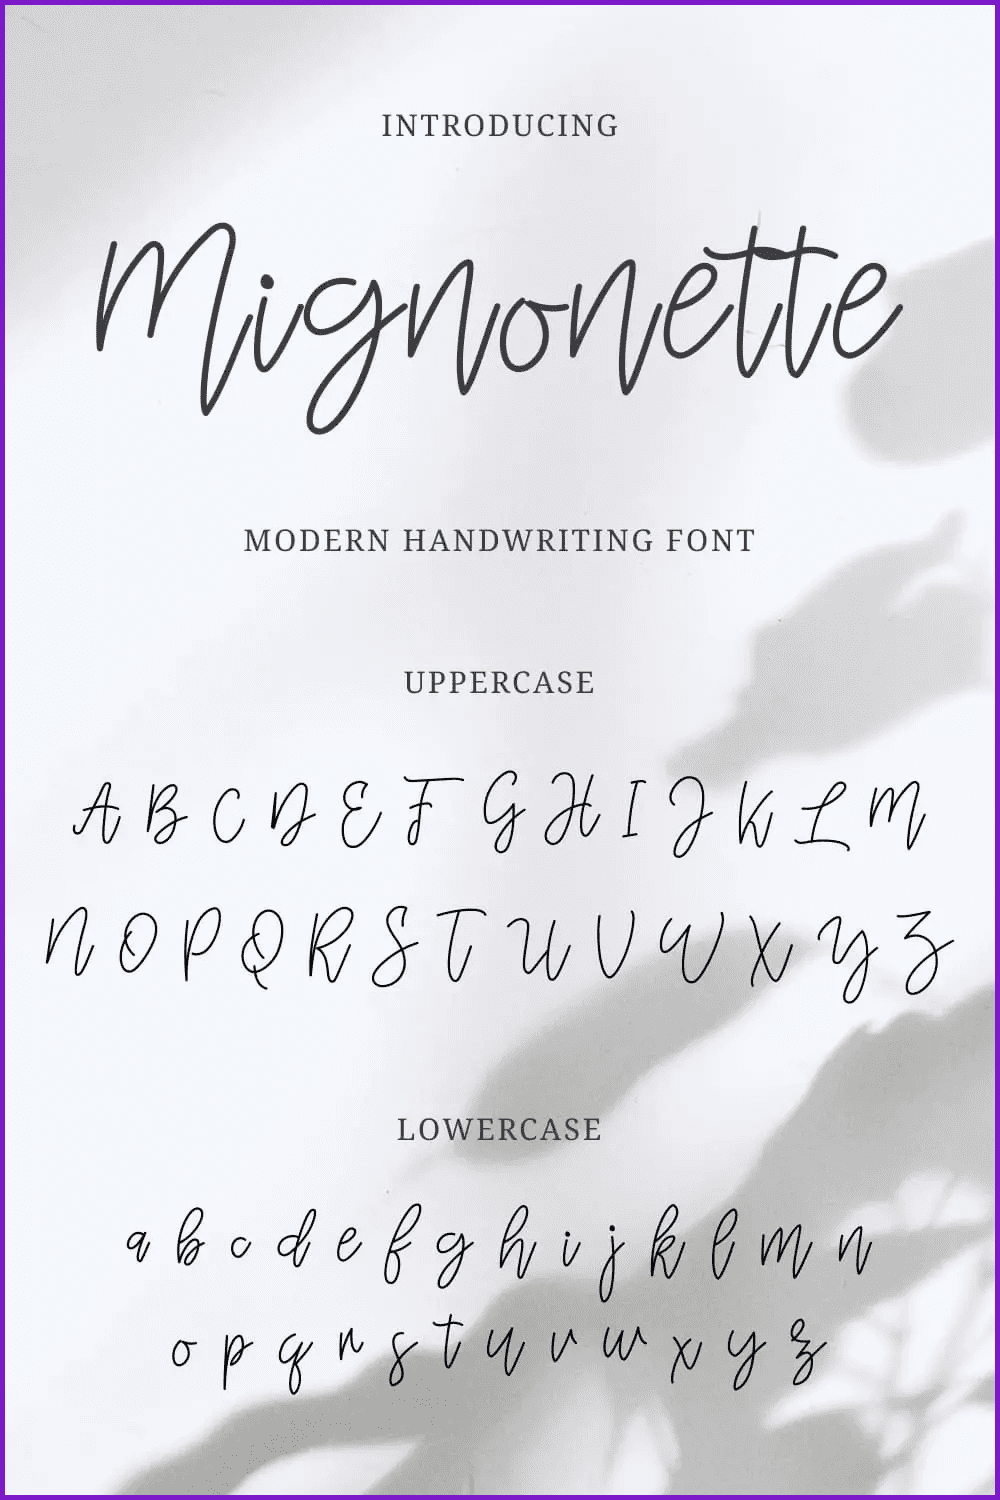 An example of Mignonette Handwriting Font on a gray background.